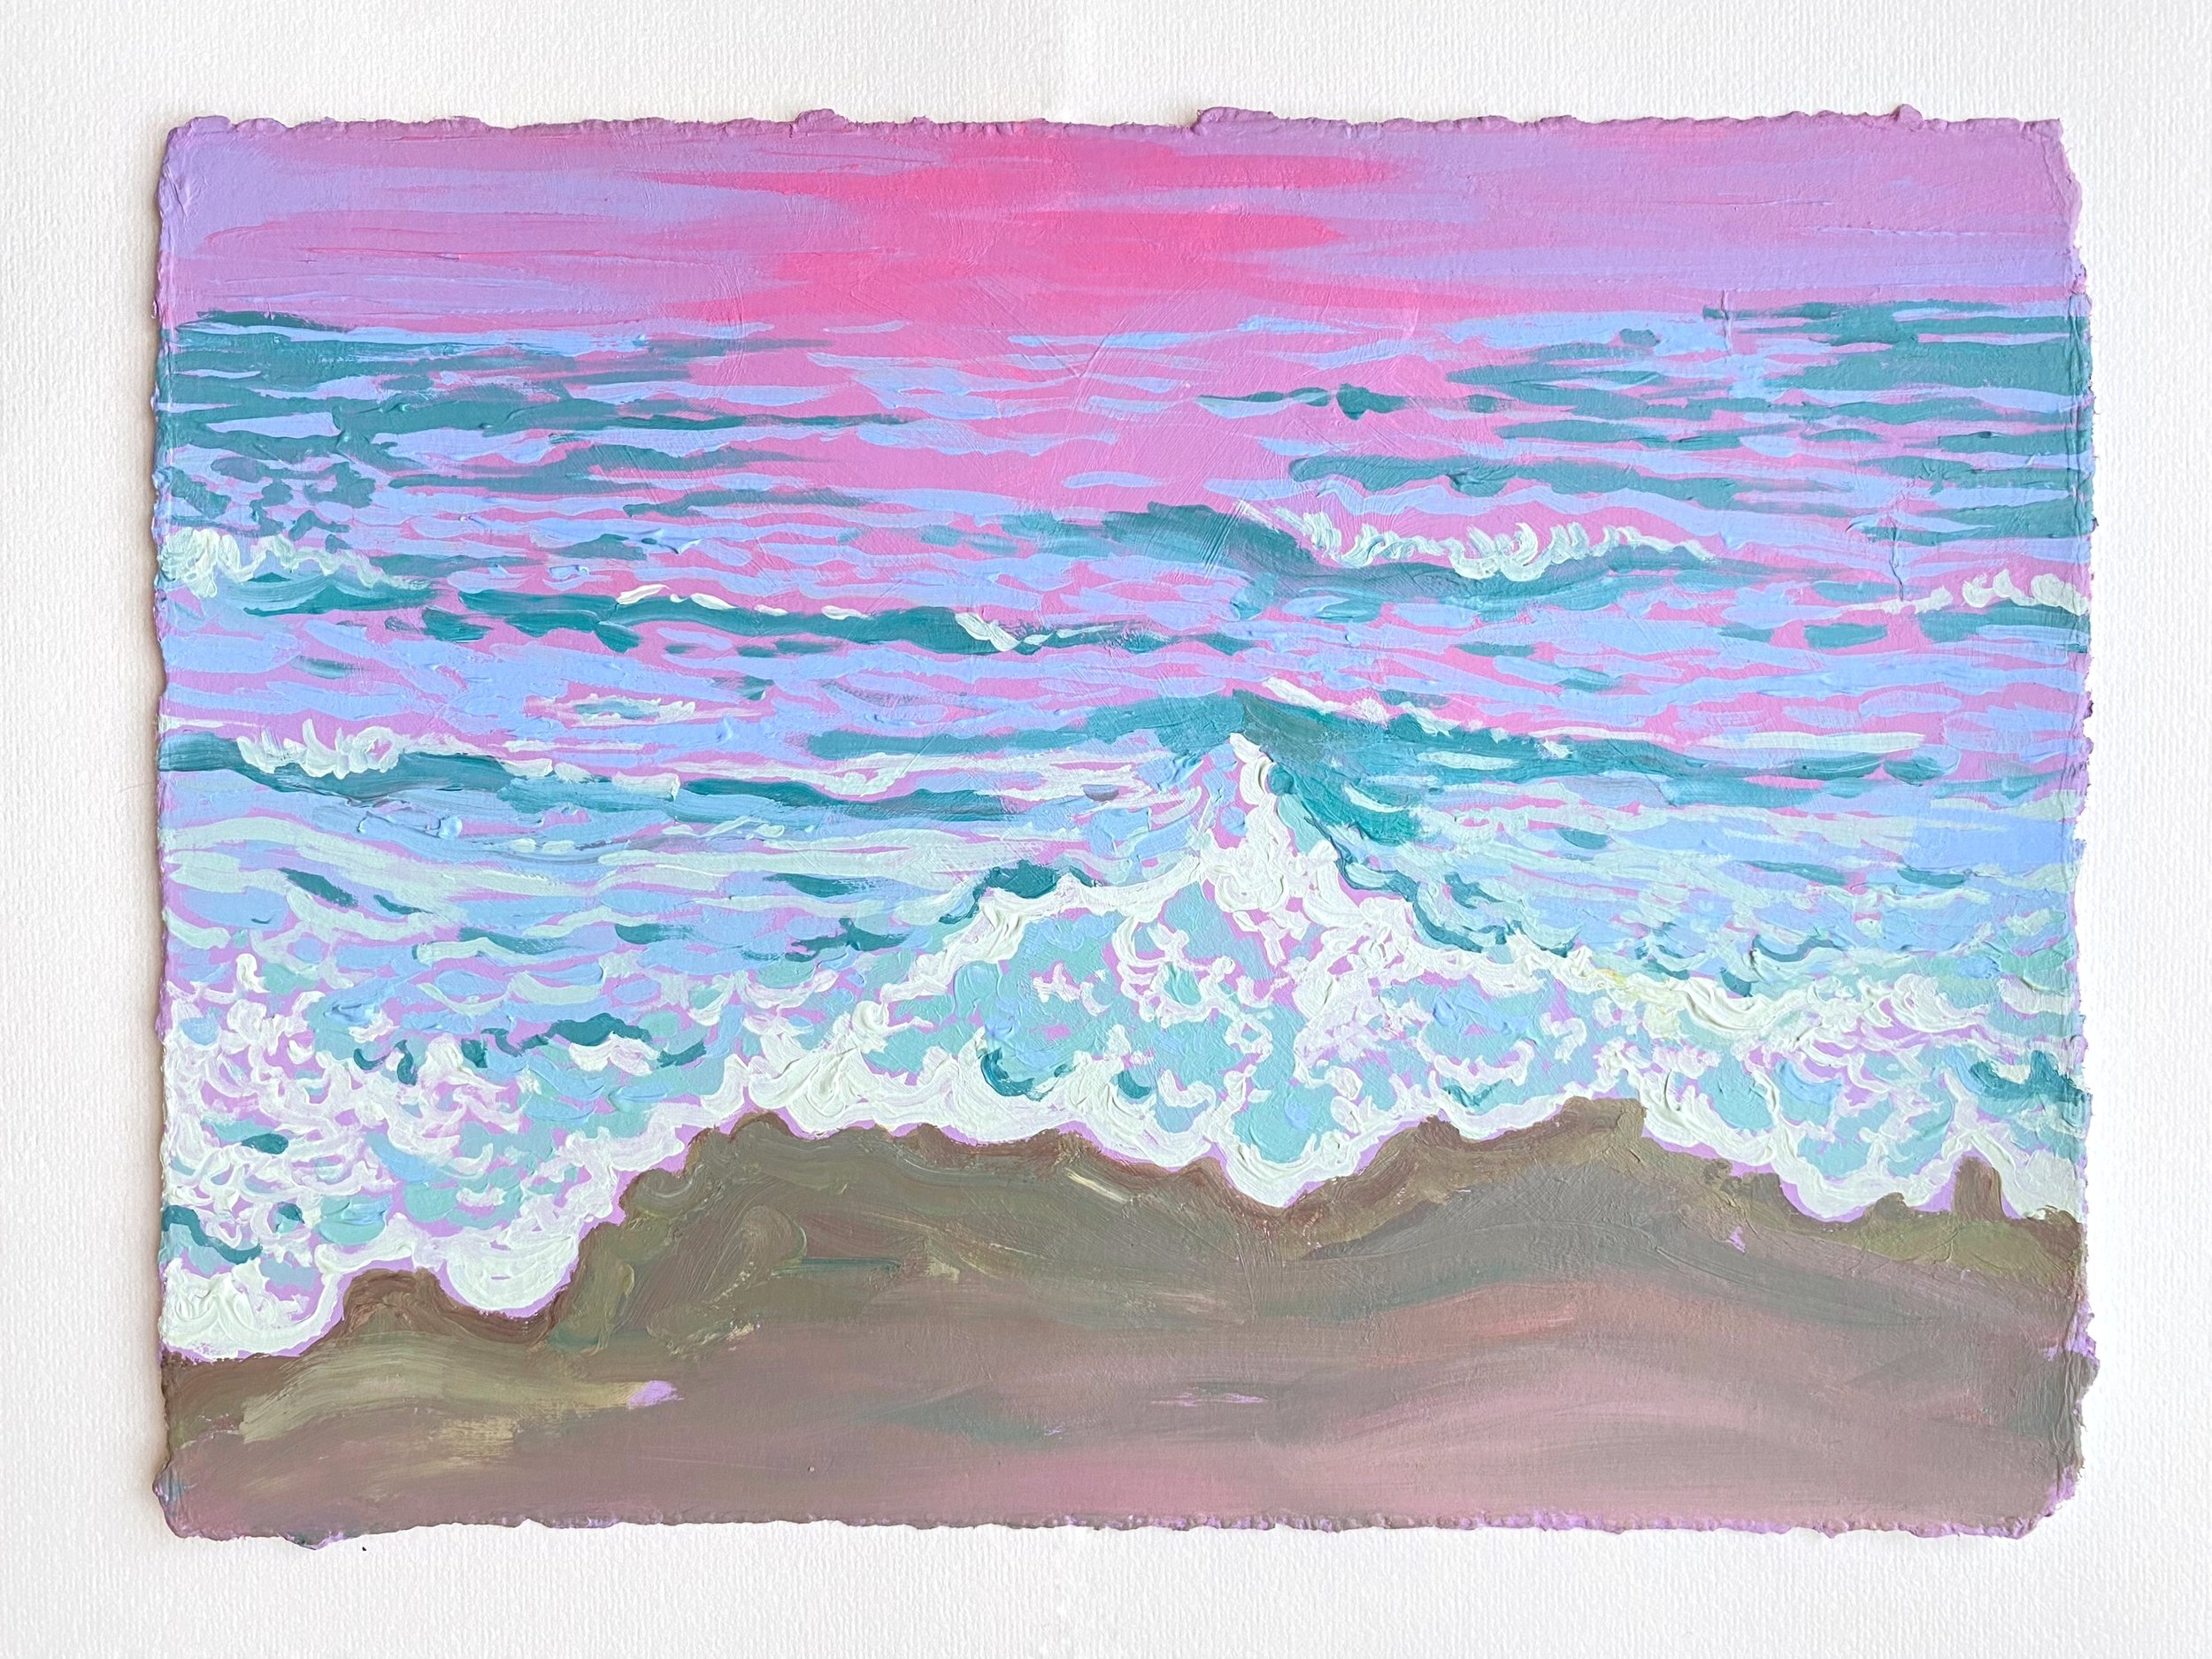 Alex+Curley%2C+Tides+and+Tranquility%2C+Acrylic+Painting+on+Cotton+Paper%2C+11.5+inches+x+8.5+inches%2C+2024.jpg